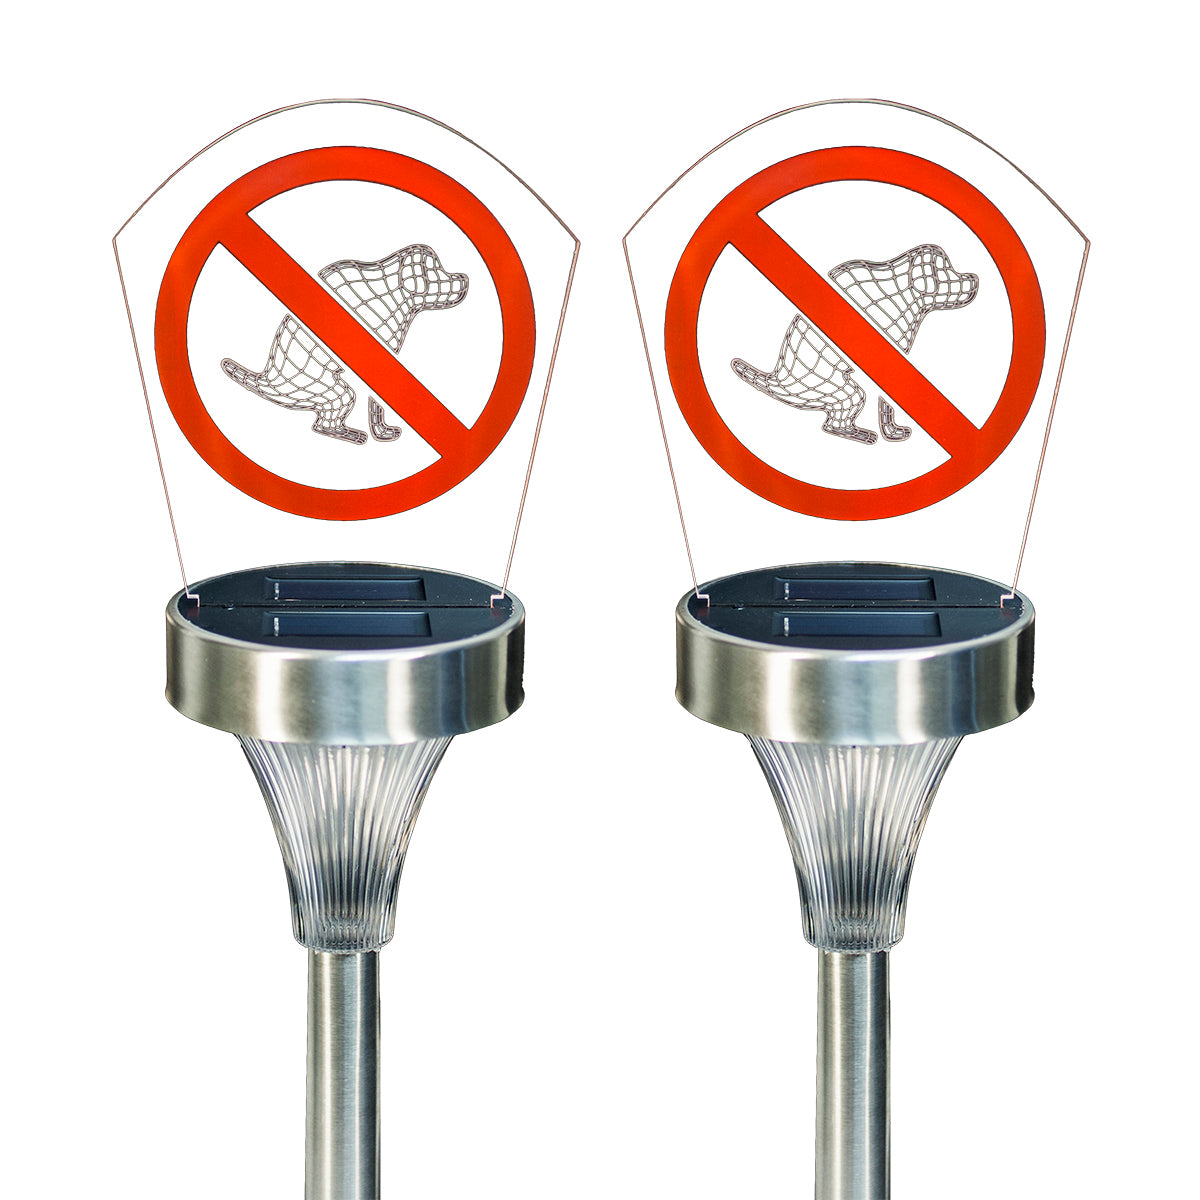 No Pooping Allowed Solar Plaque Light (2 pc set)